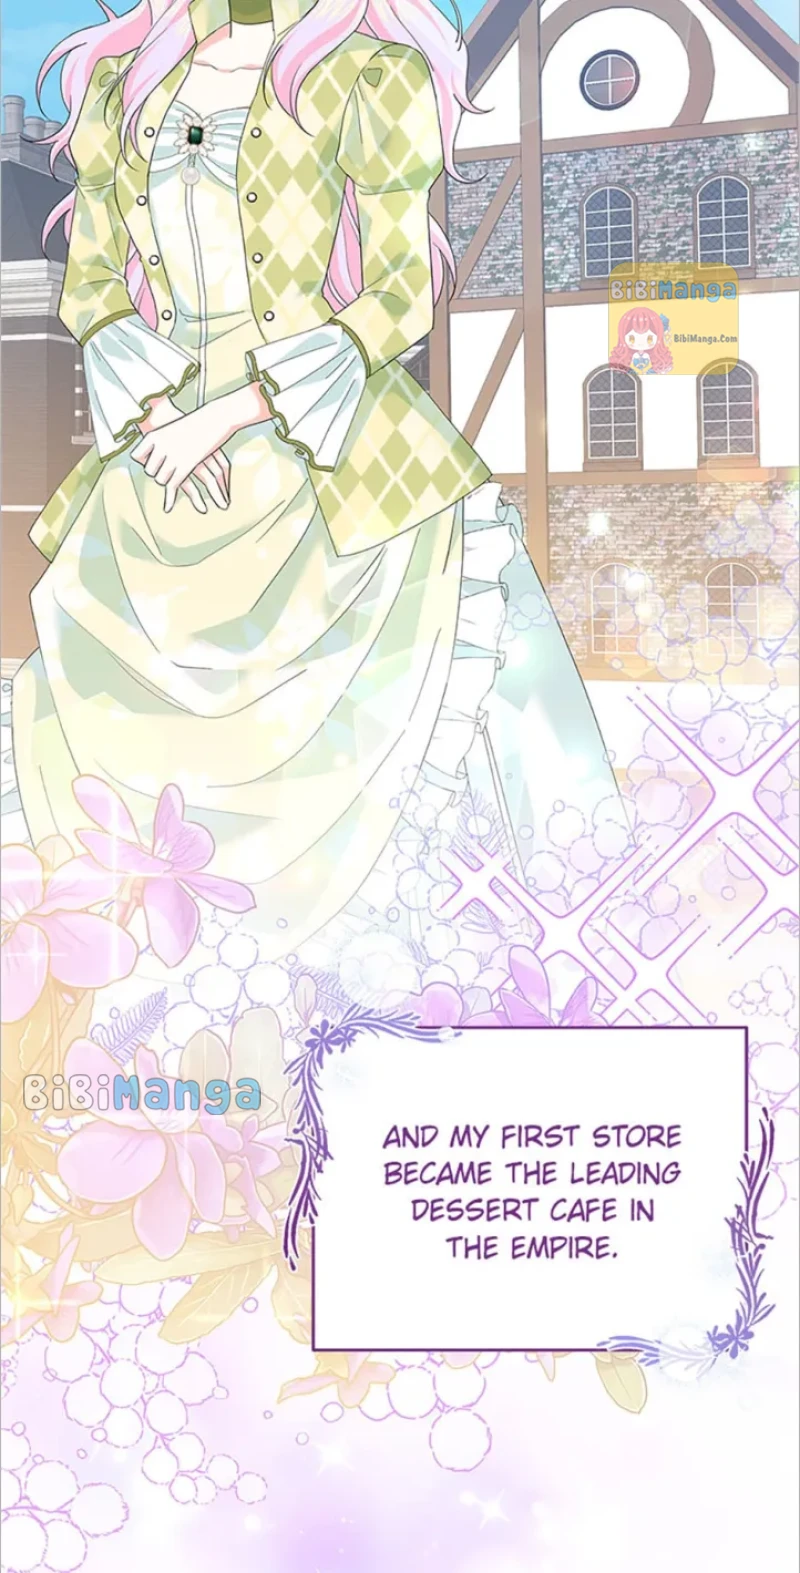 She came back and opened a dessert shop chapter 68